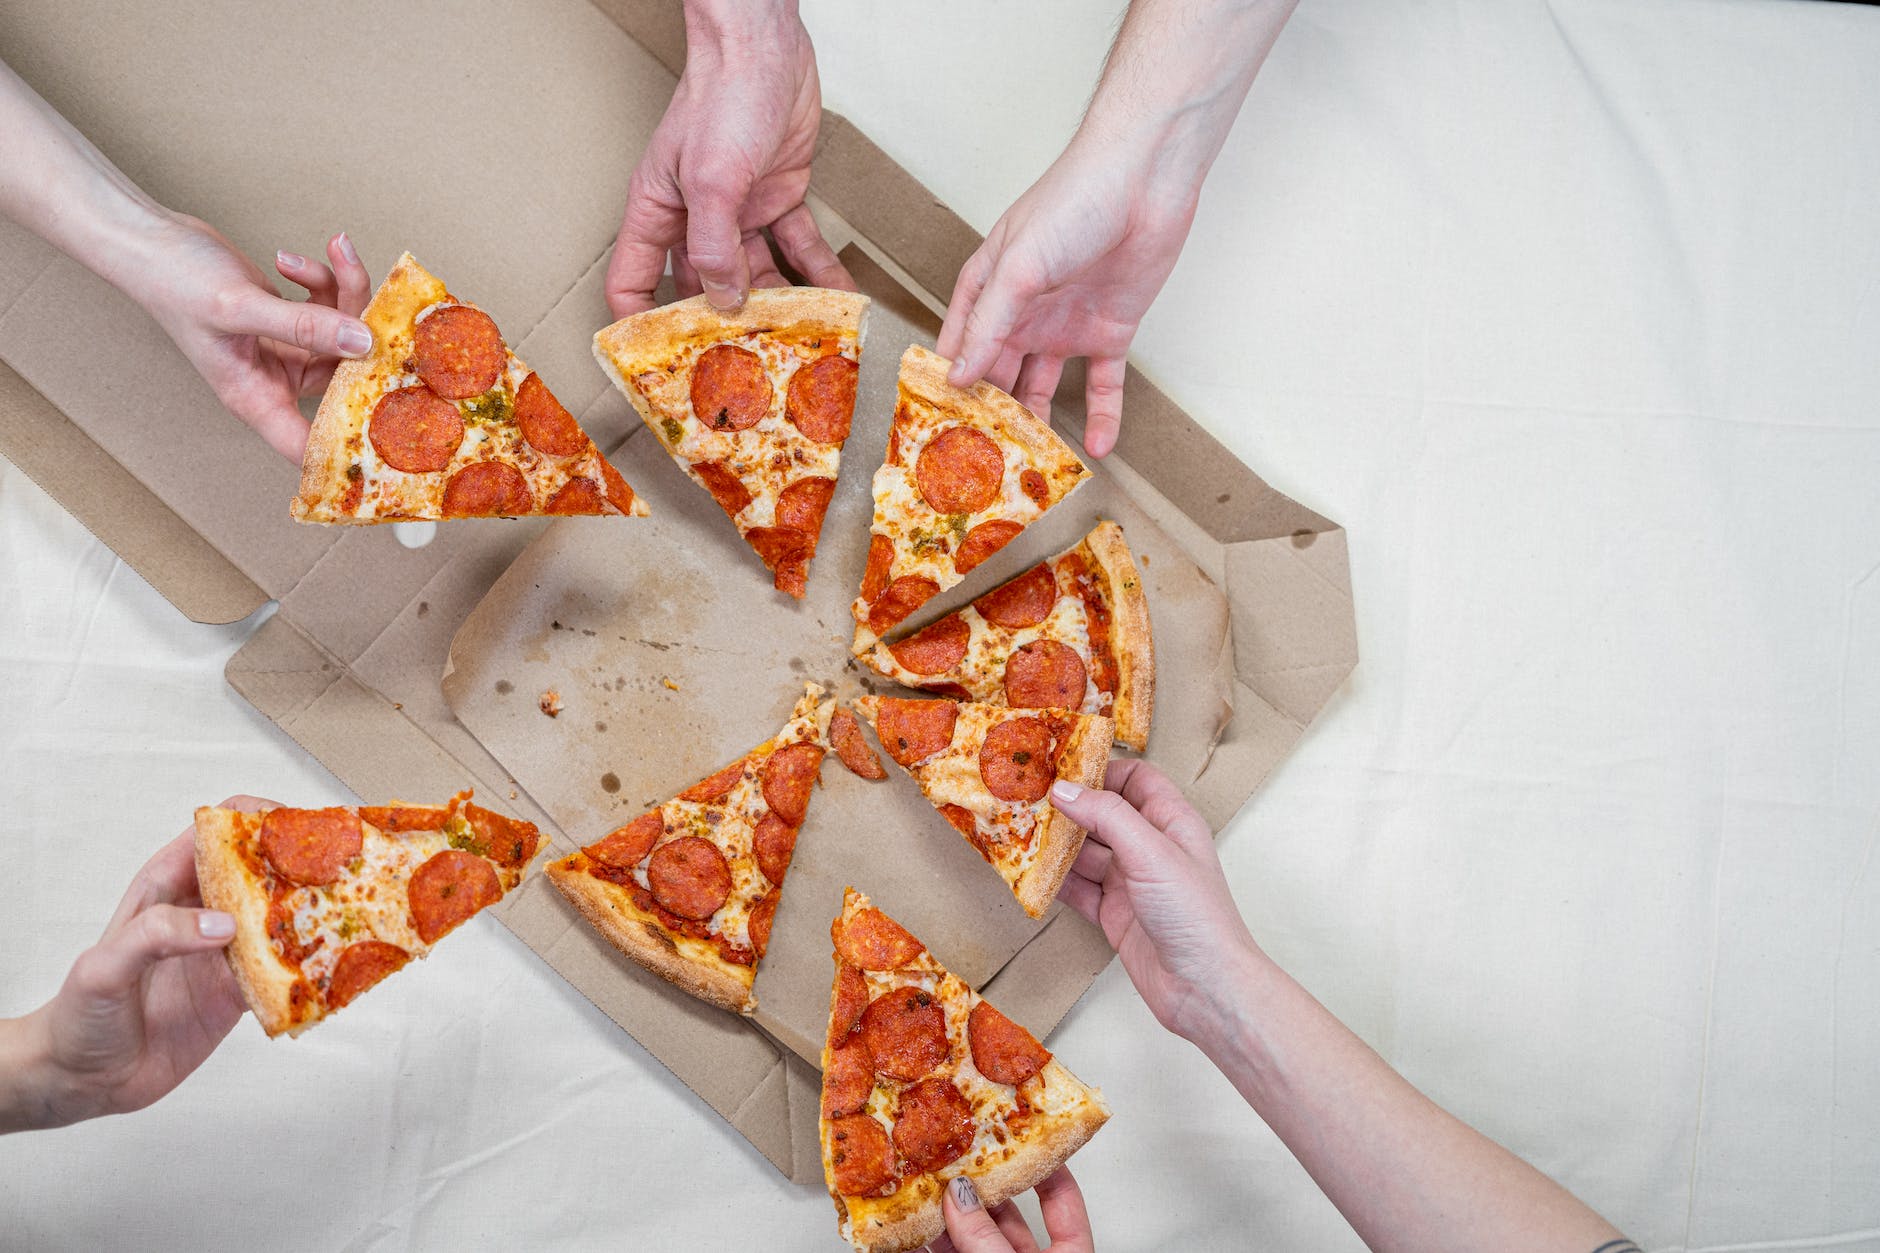 Royalty Distribution or Profit Sharing (picture of people sharing pizza) - Photo by cottonbro studio on Pexels.com